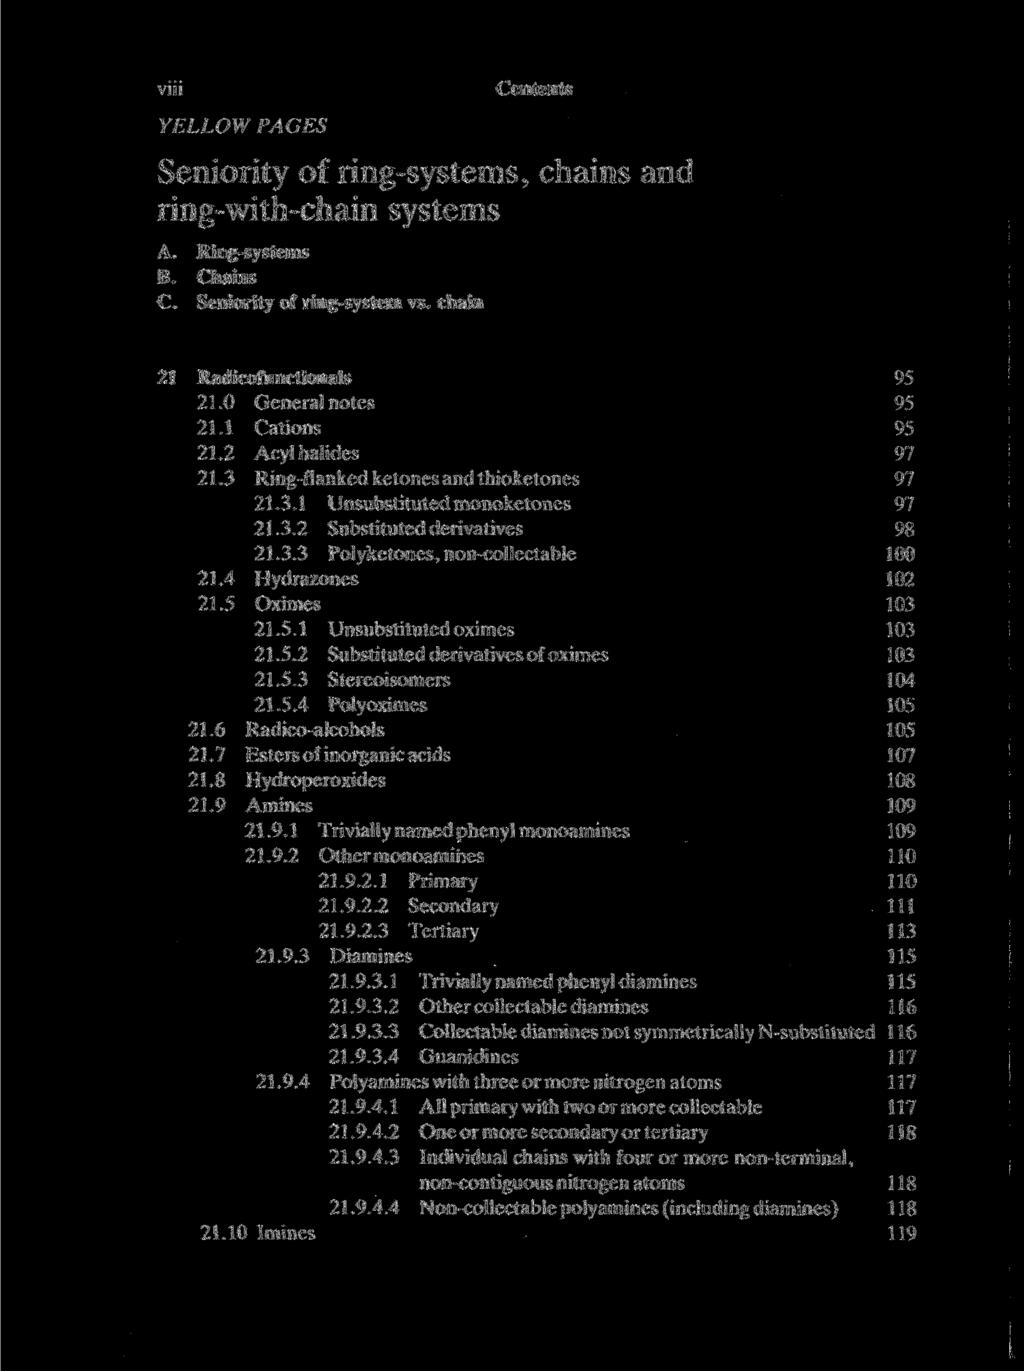 Vlll YELLOW PAGES Seniority of ring-systems, chains and ring-with-chain Systems A. Ring-systems B. Chains C. Seniority of ring-system vs. chain 21 Radicofunctionais 95 21.0 General notes 95 21.